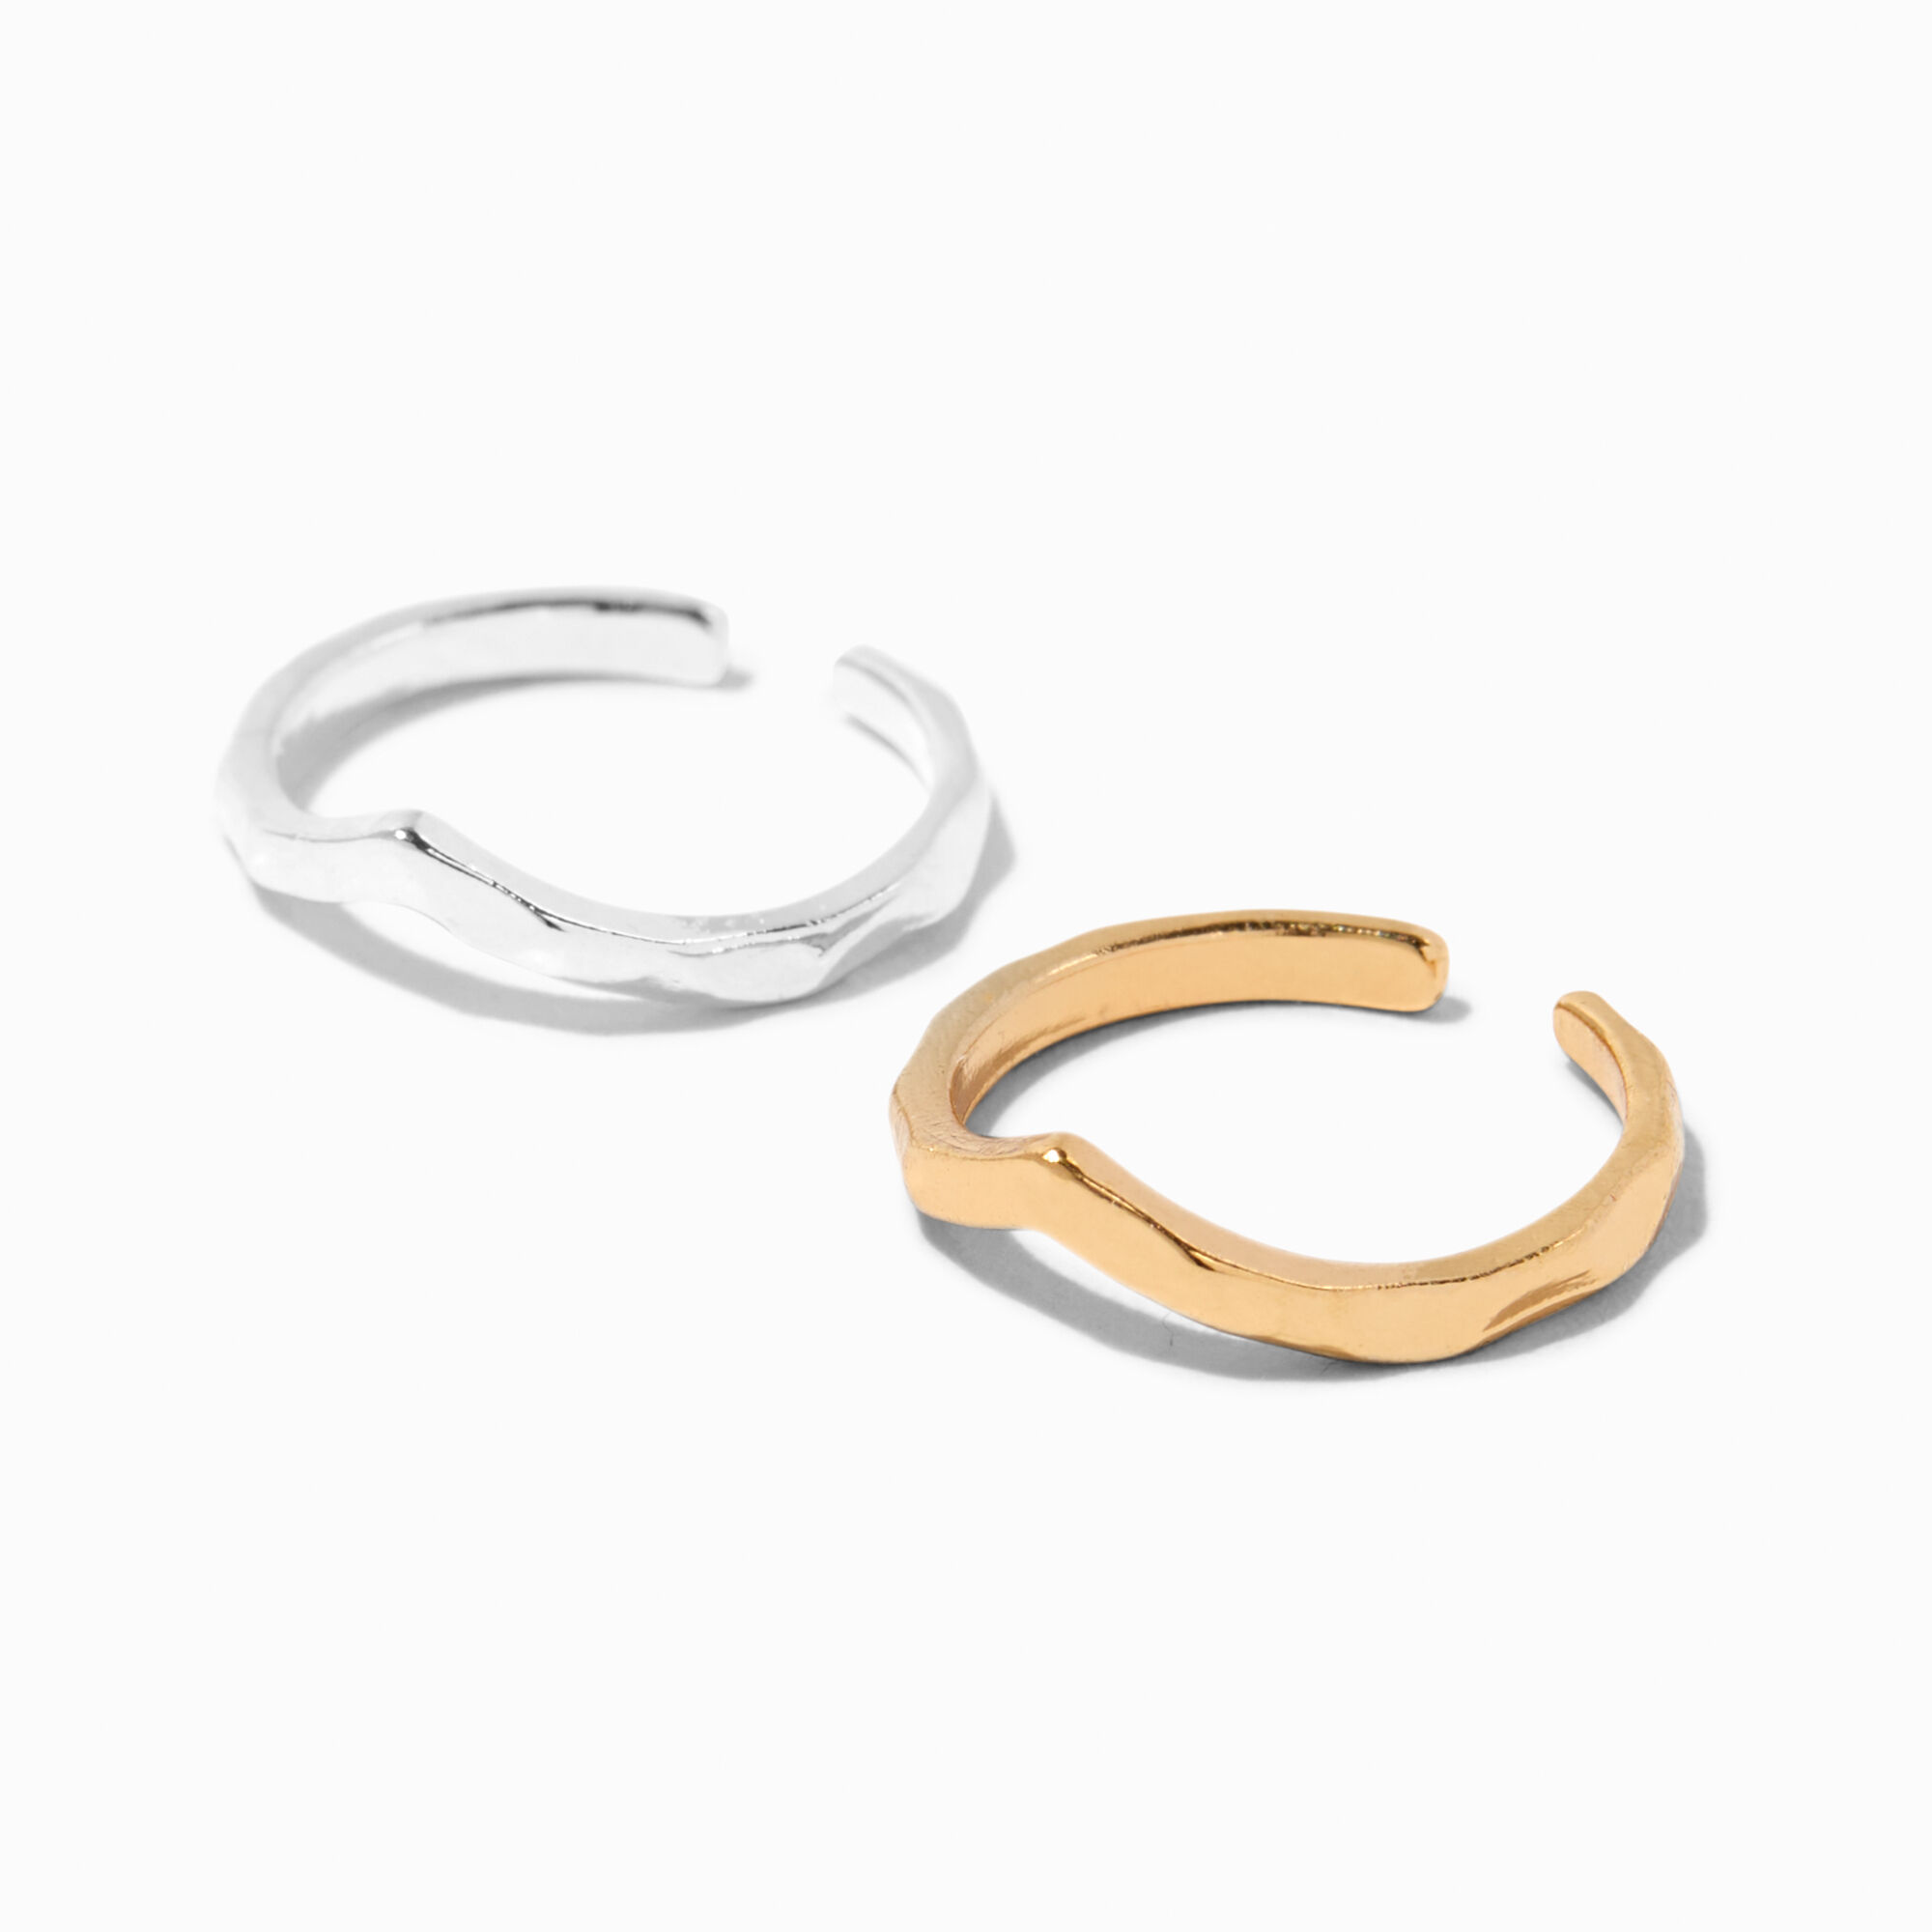 View Claires GoldTone Chevron Toe Rings 2 Pack Silver information